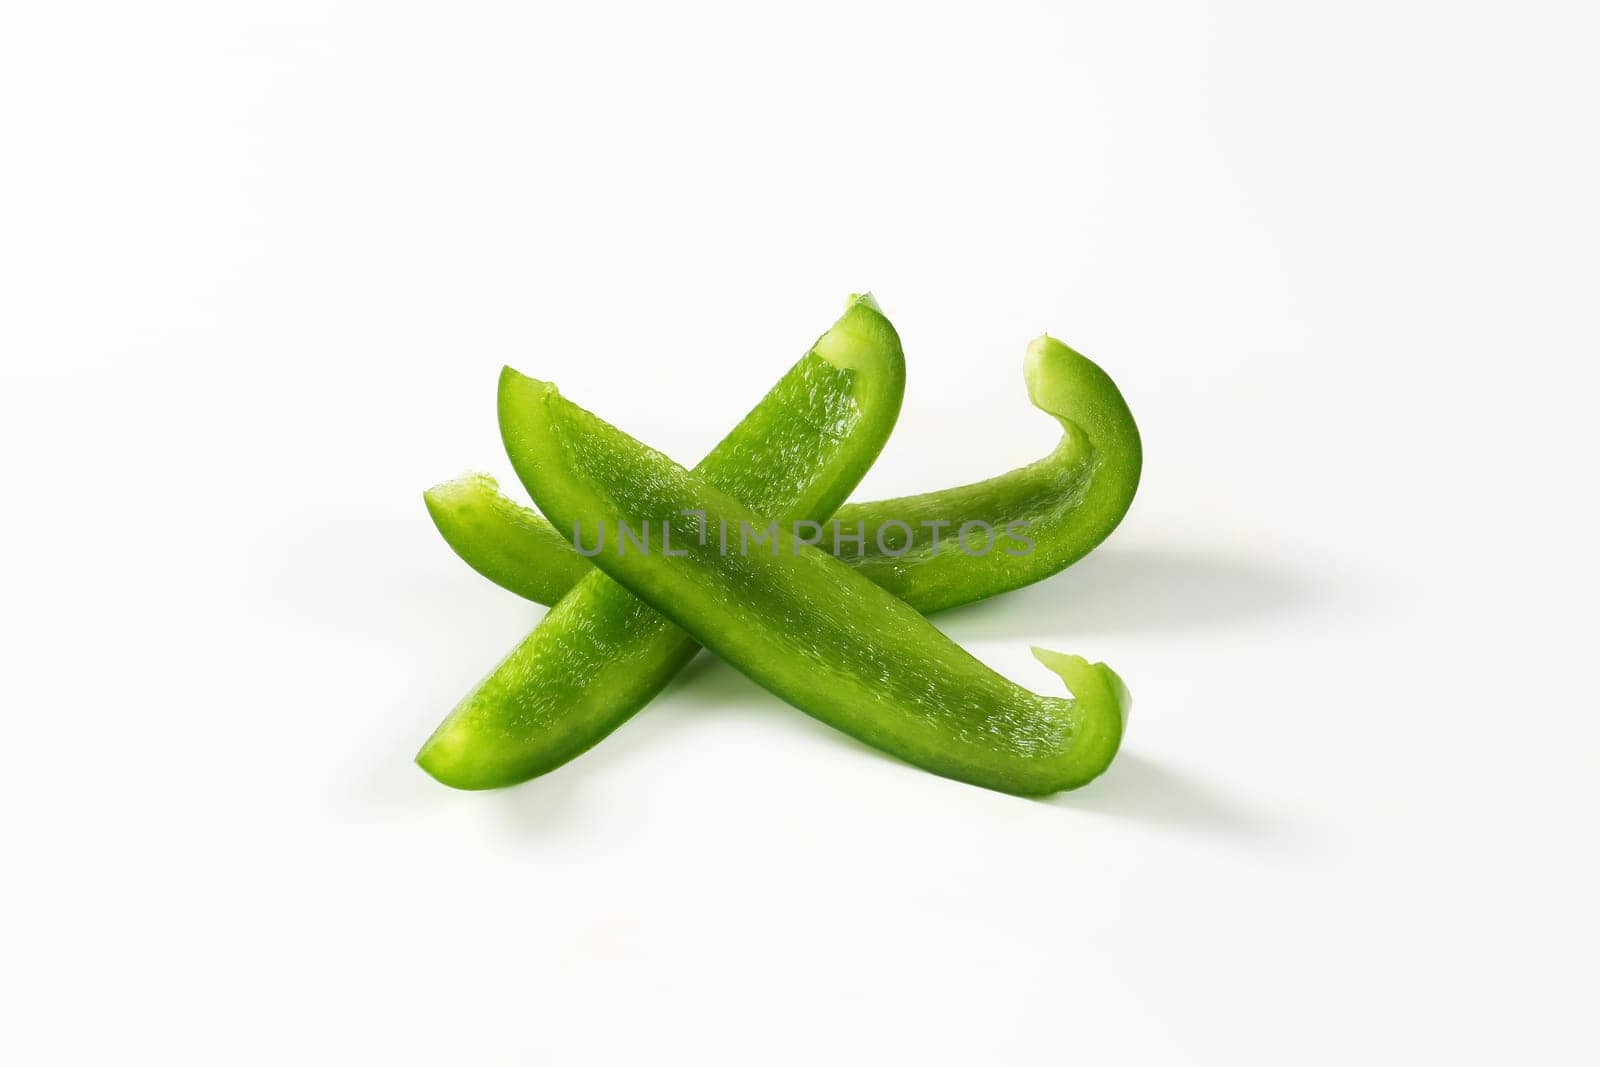 Green pepper slices by Digifoodstock